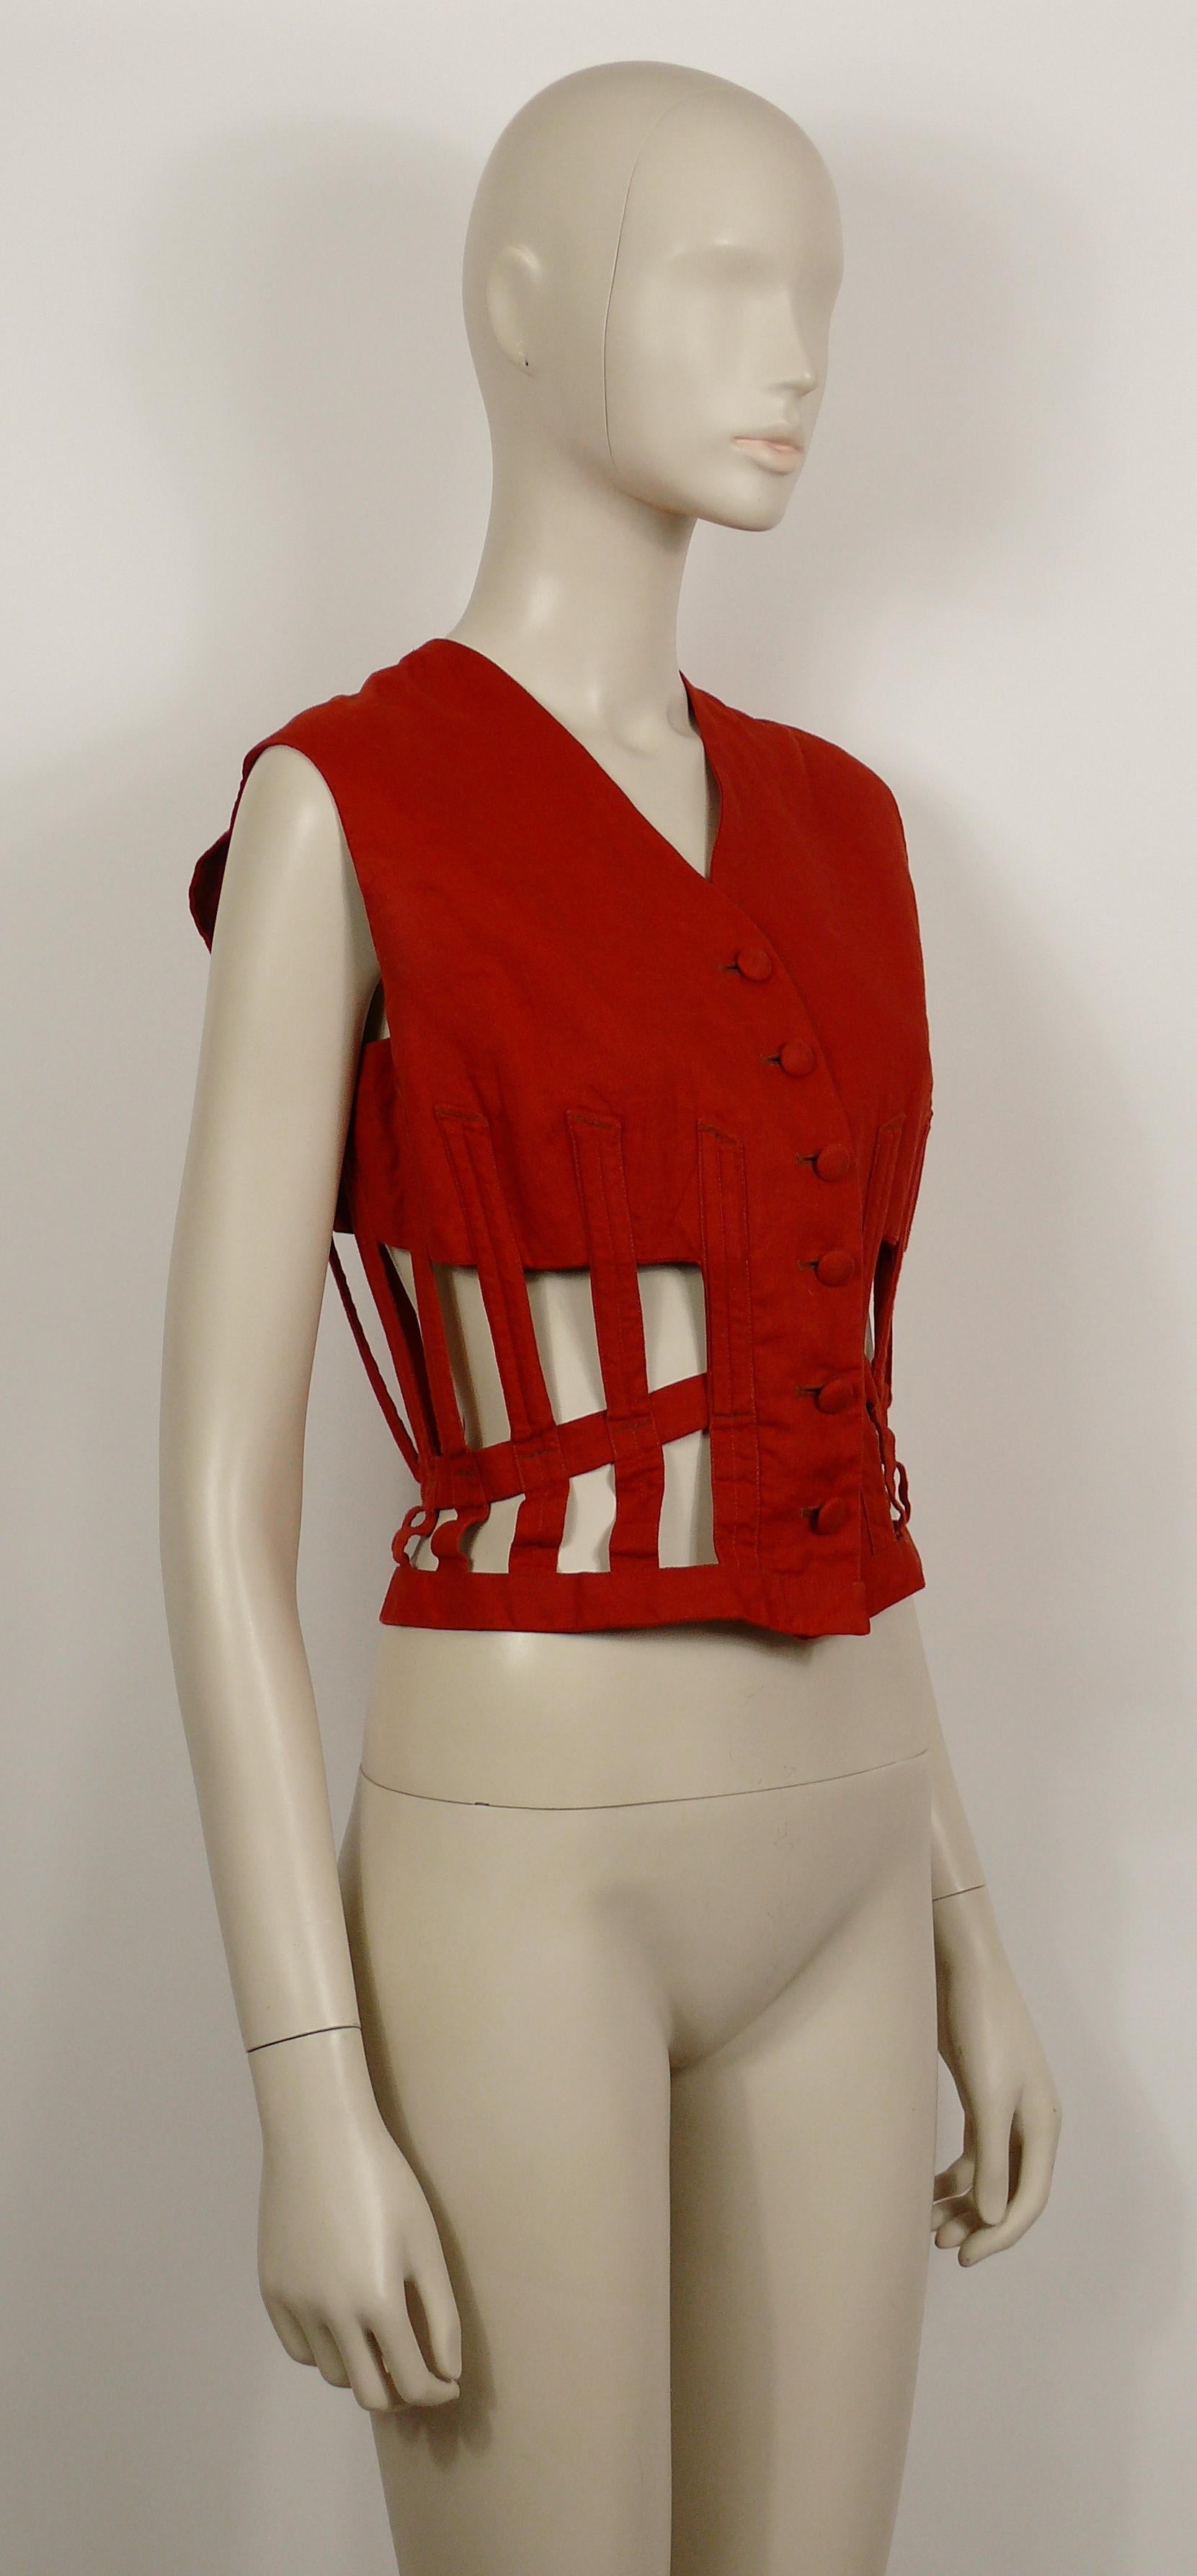 JEAN PAUL GAULTIER vintage iconic brick red vest.

This jacket features :
- Cage openwork with corset bones design.
- Laced back.
- Button down closure.

Label reads JEAN PAUL GAULTIER FEMME.

Size label reads : 42.
Please refer to